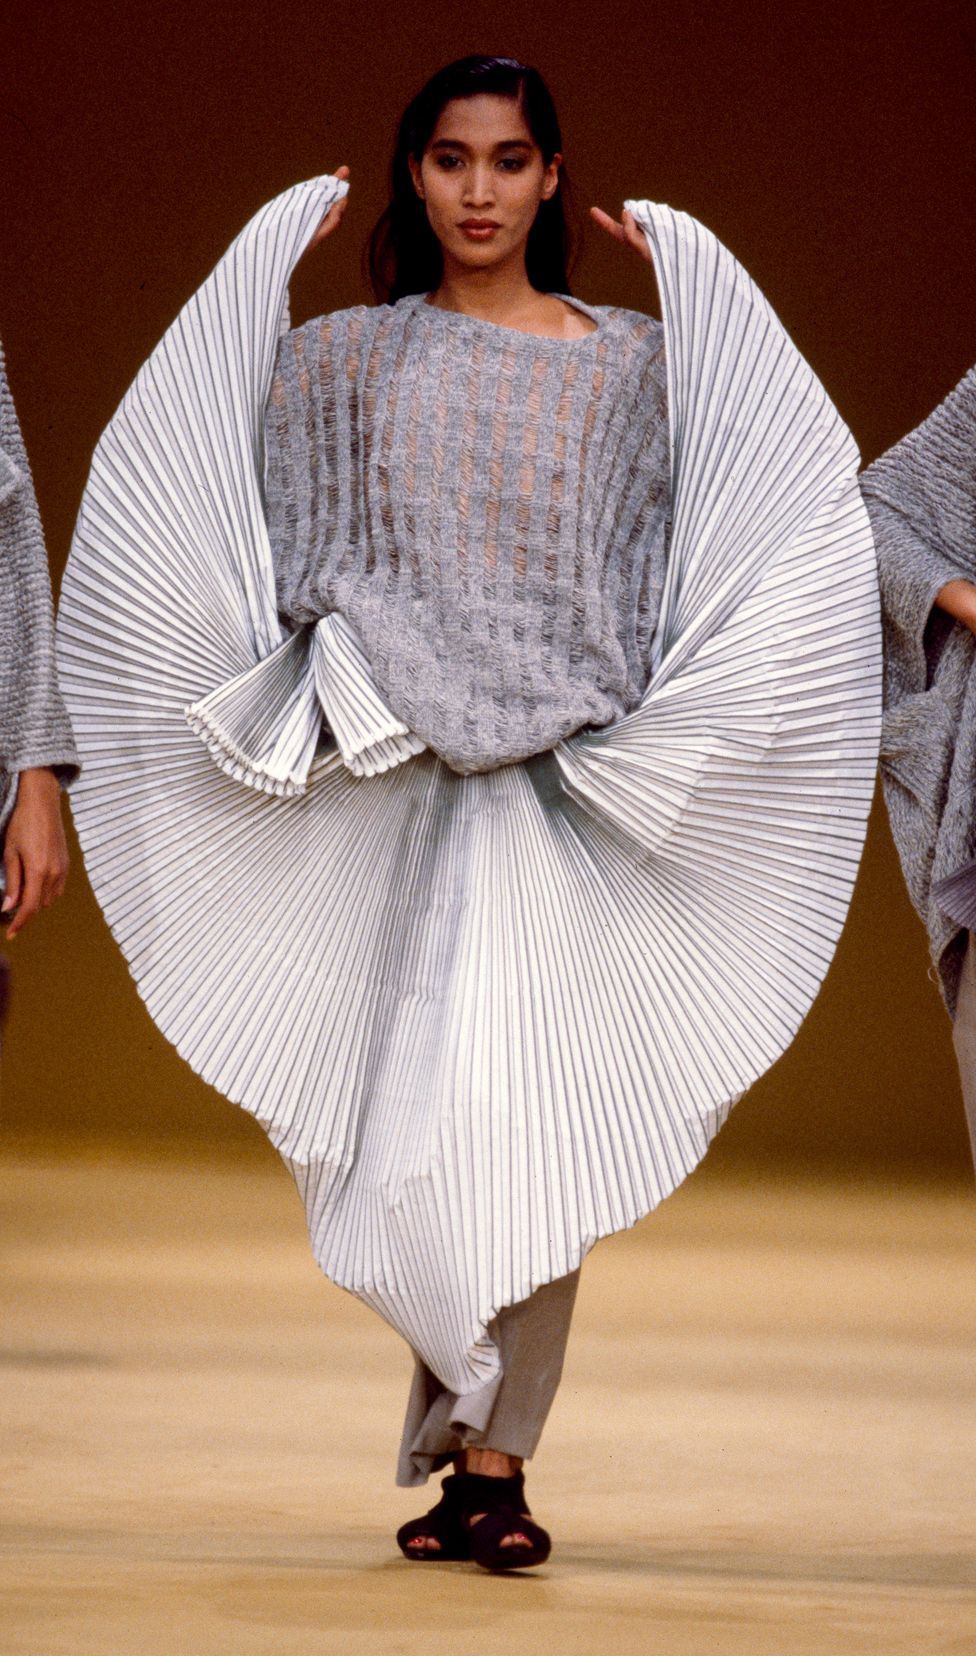 Issey Miyake's Ready-to-Wear Spring-Summer 1985 fashion show in Paris, France